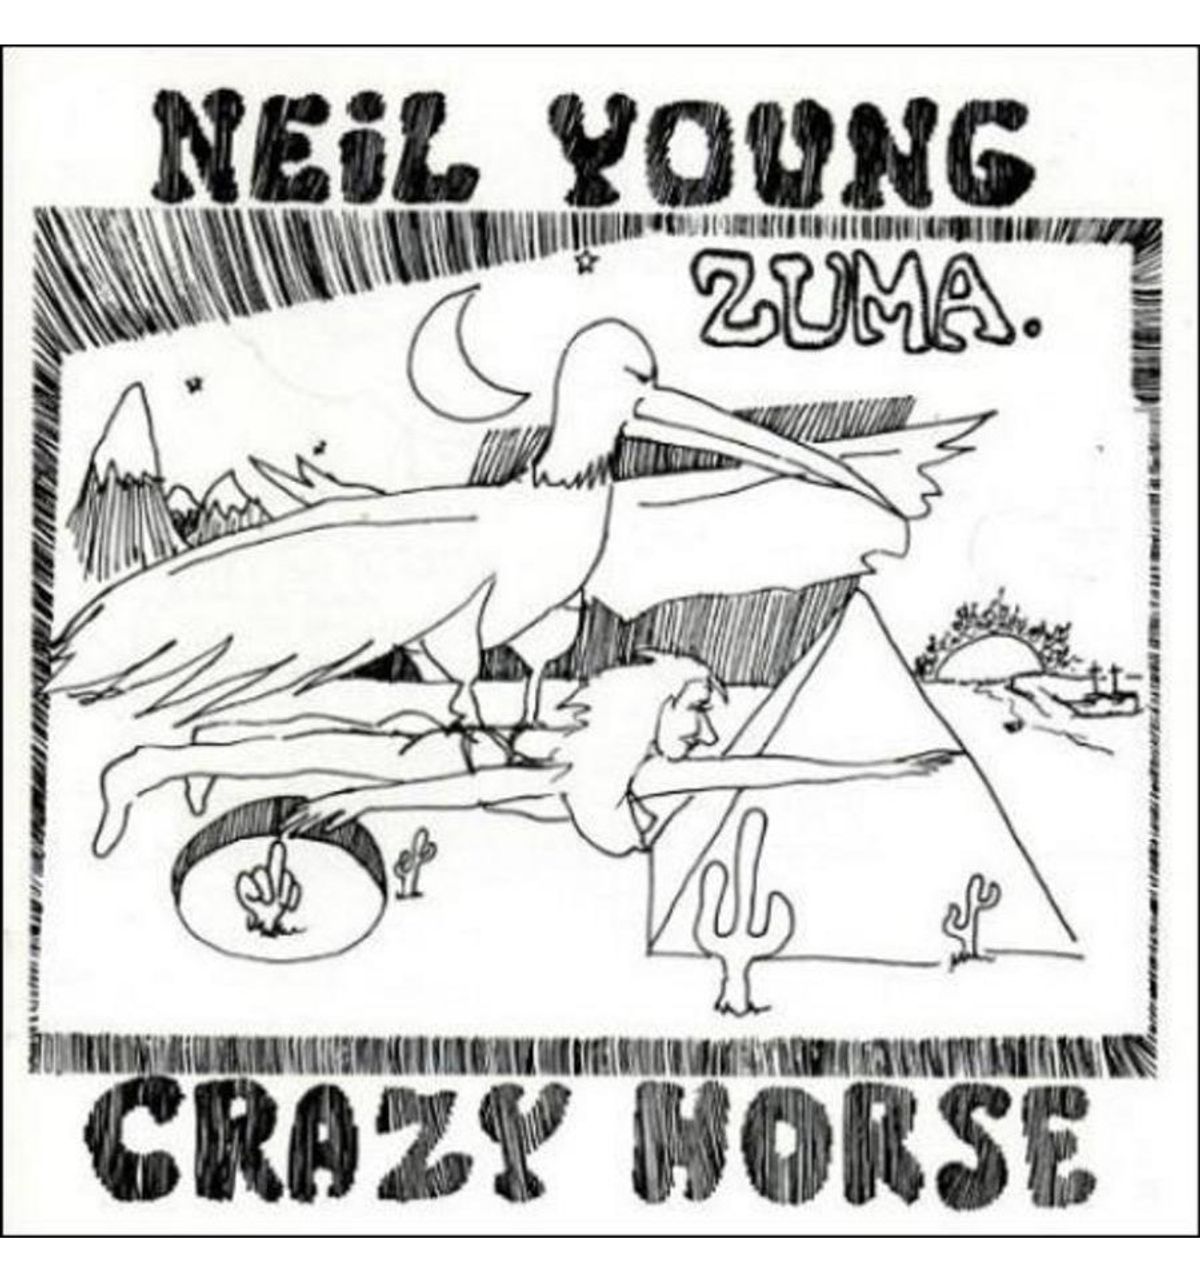 #DisasterSongs - Neil Young - Cortez The Killer (1975)